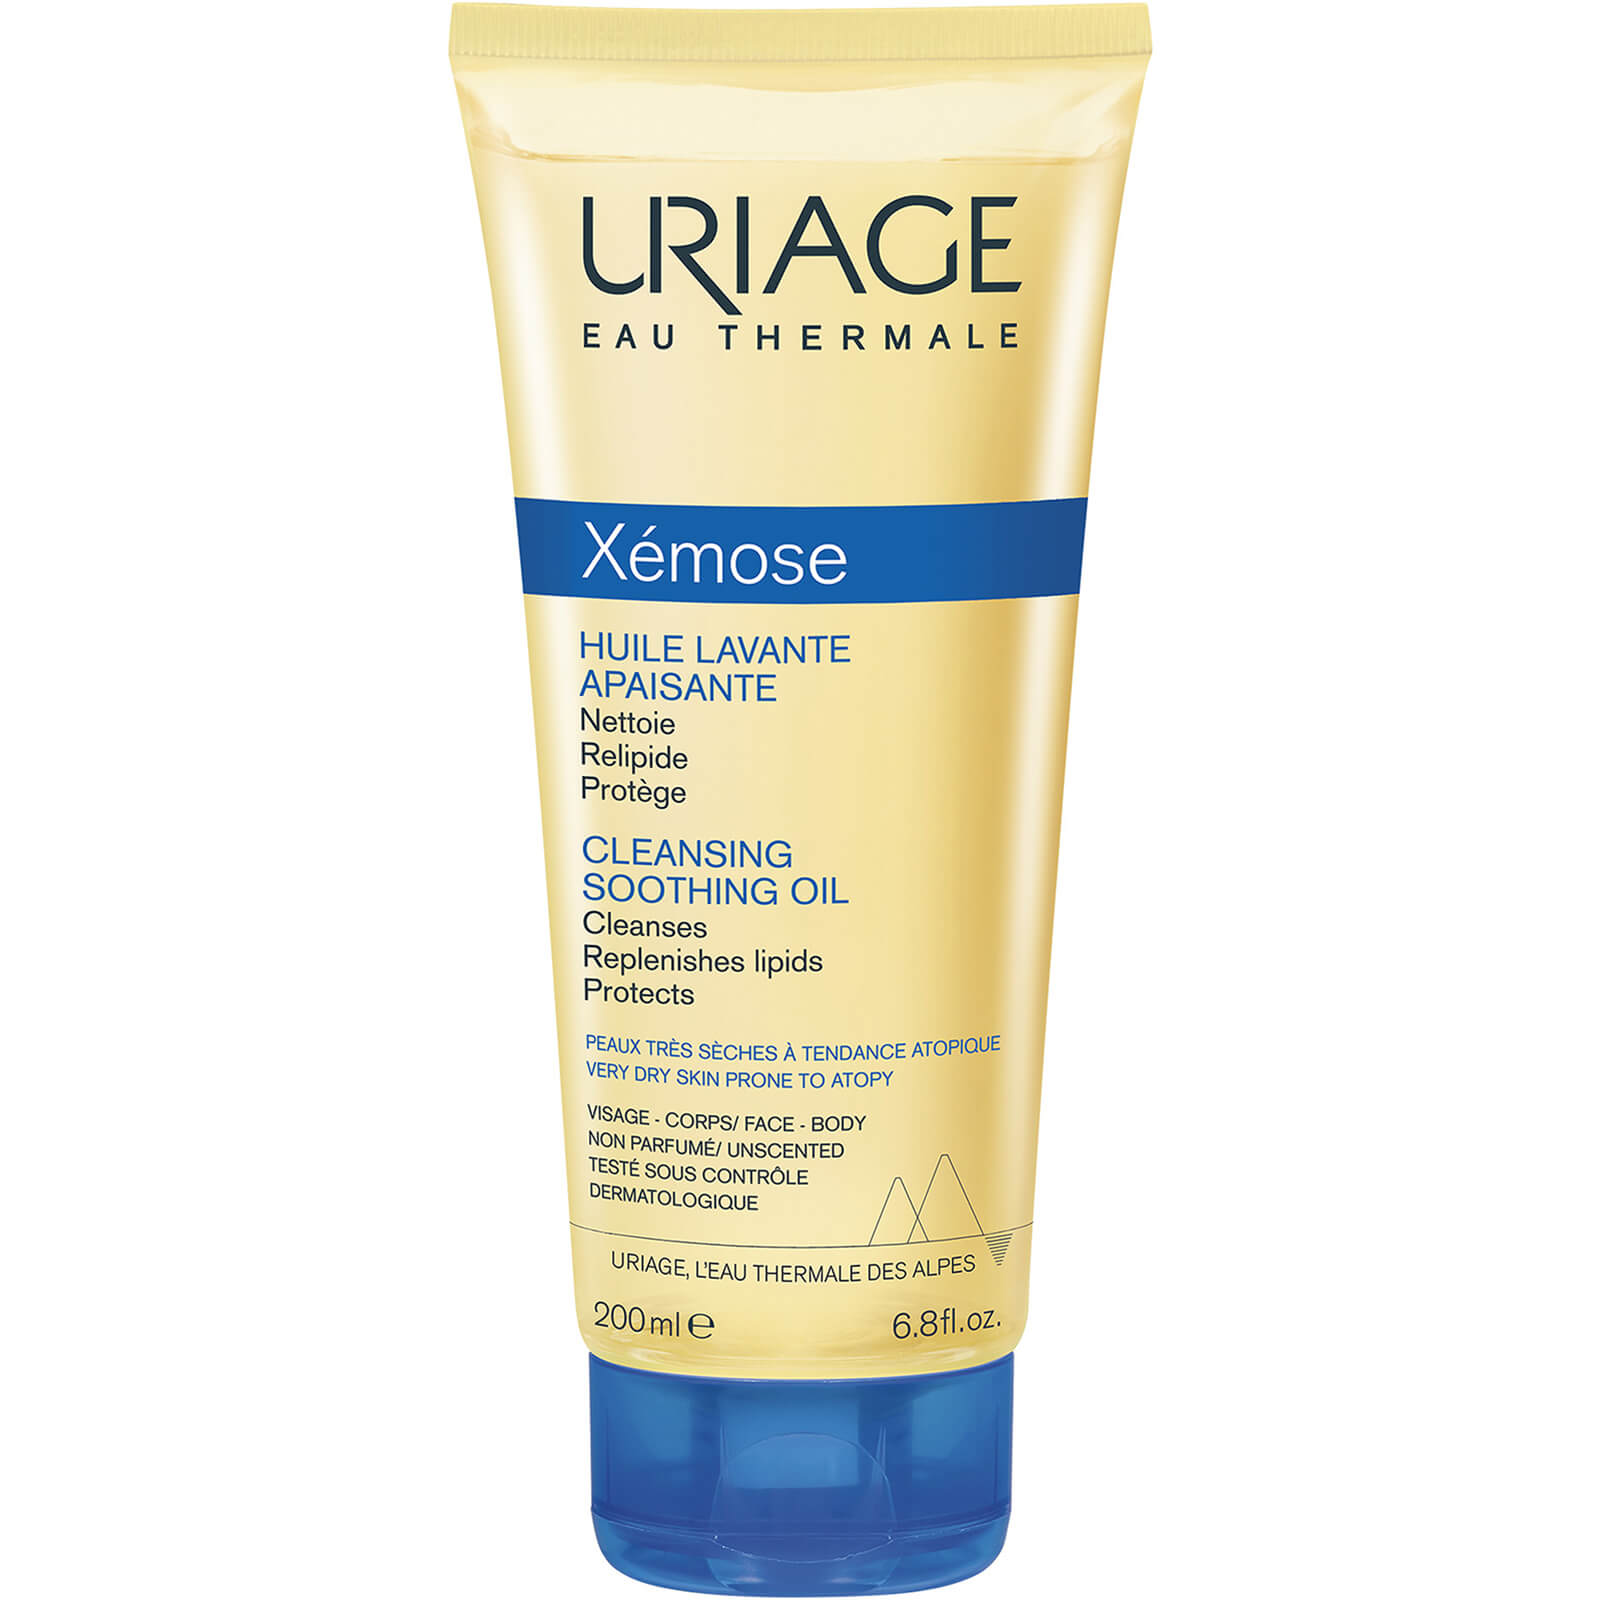 Photos - Facial / Body Cleansing Product Uriage Xémose Cleansing Oil 200ml 65137665 